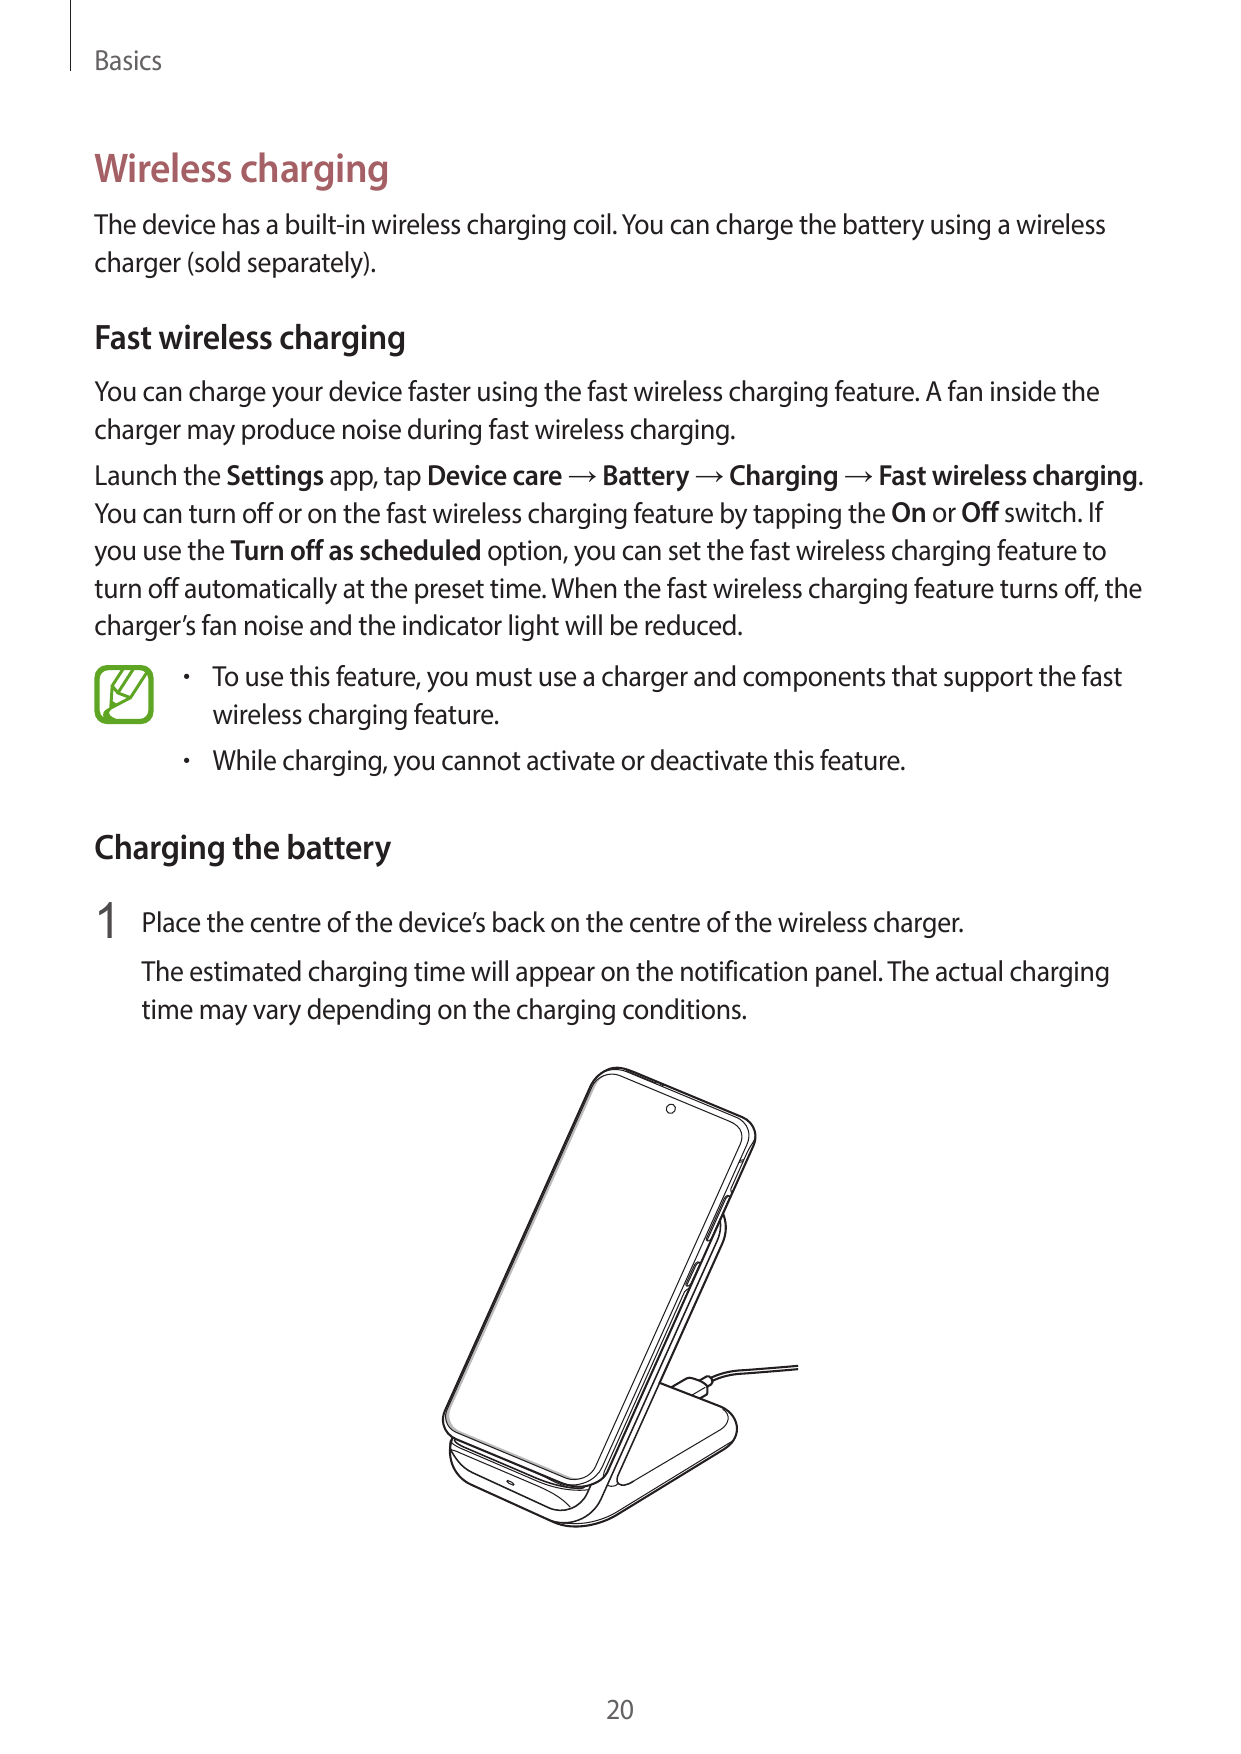 BasicsWireless chargingThe device has a built-in wireless charging coil. You can charge the battery using a wirelesscharger (sol